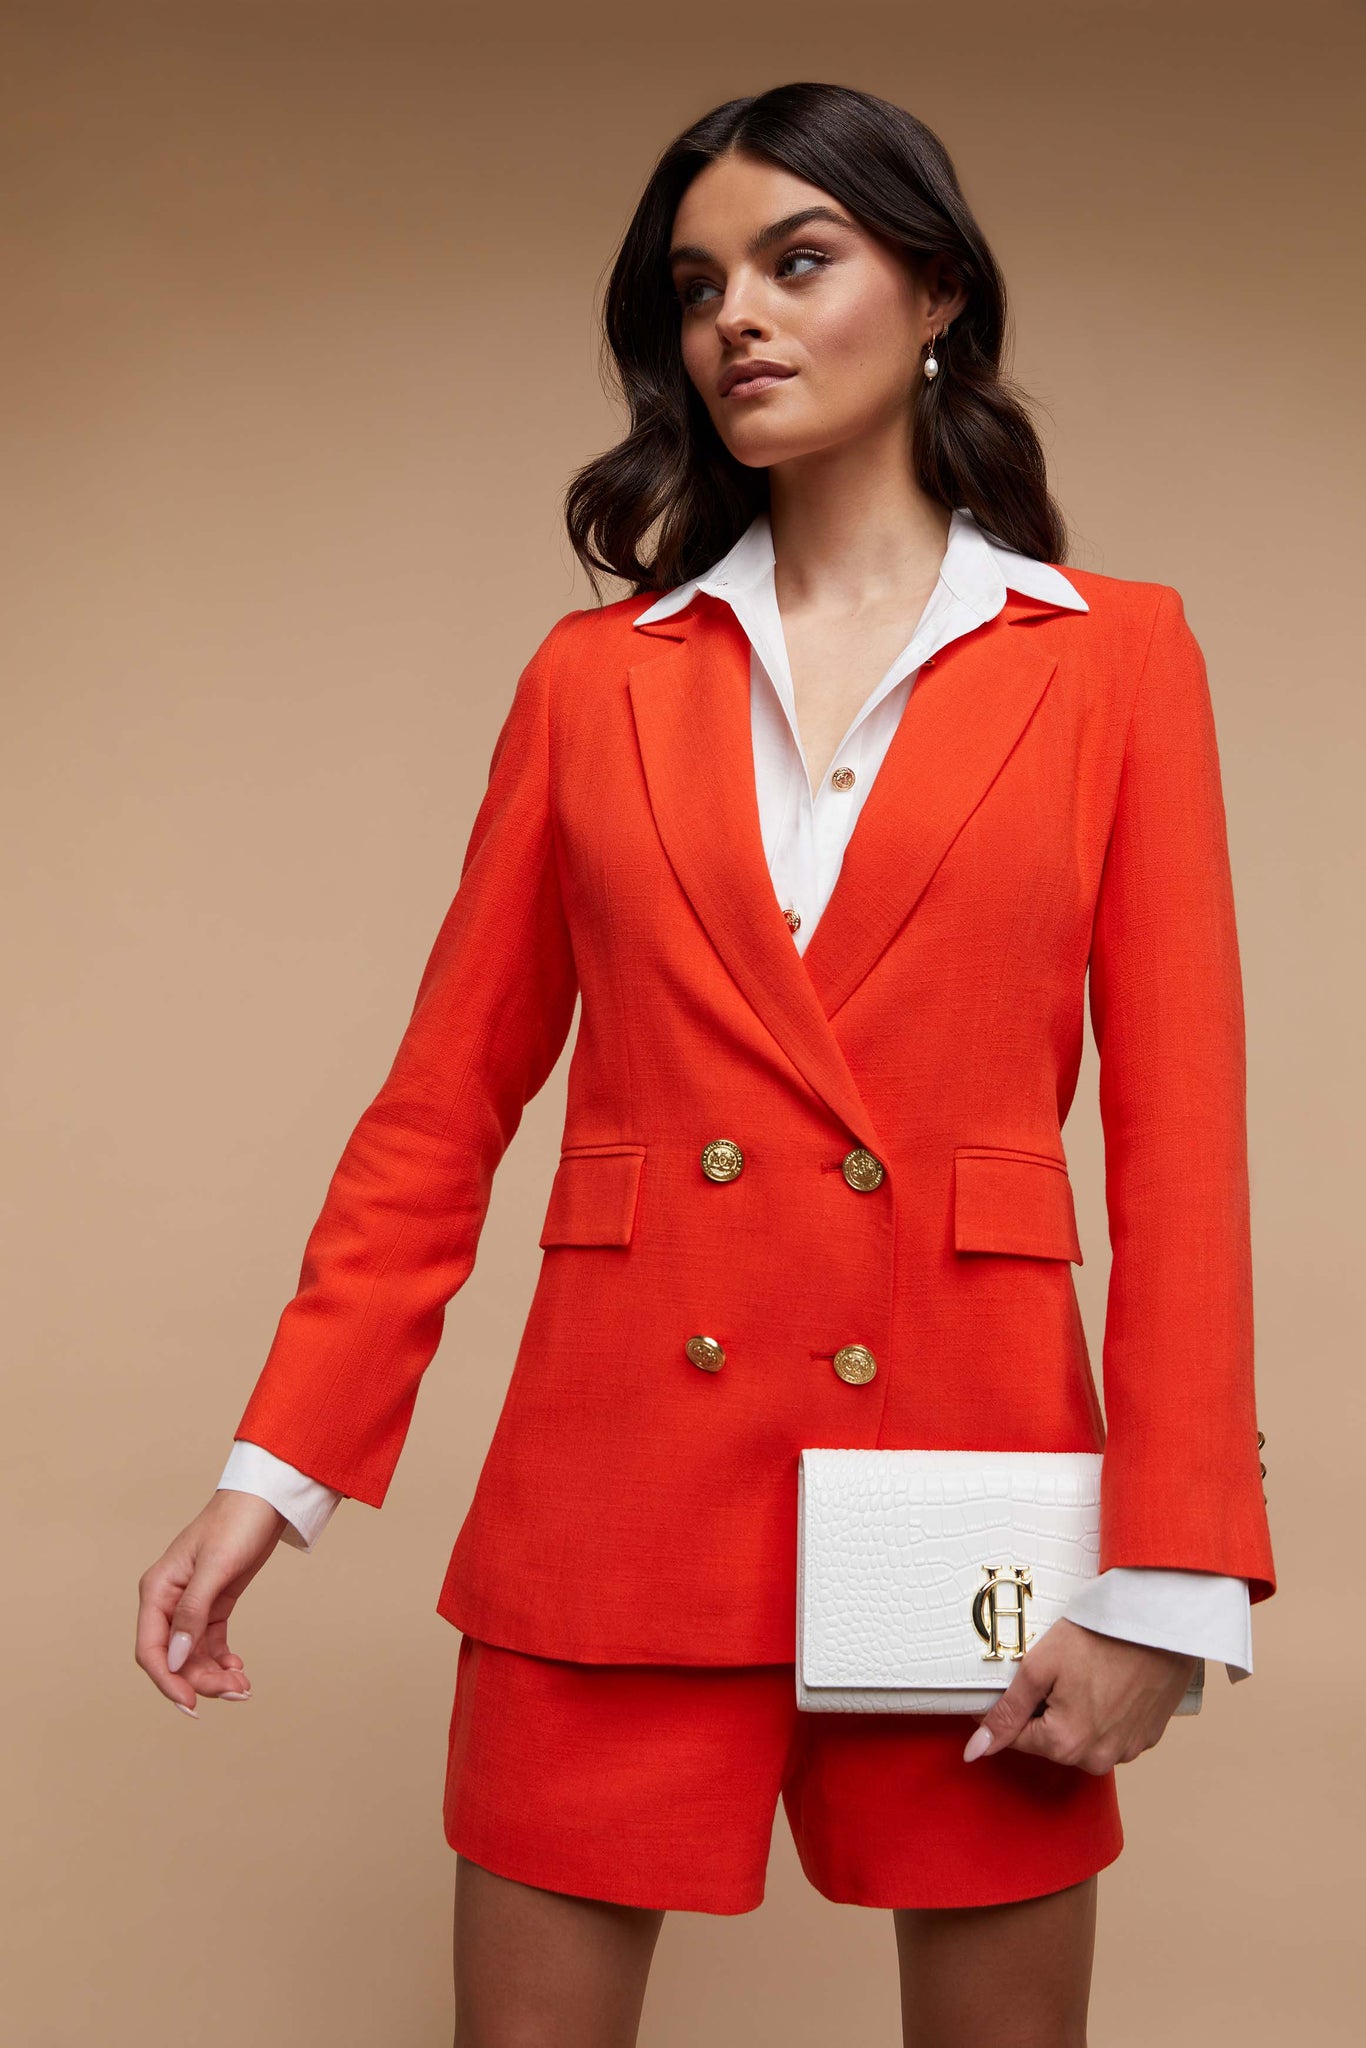 double breasted linen blazer in orange with two hip pockets and gold button detials down front and on cuffs and handmade in the uk 